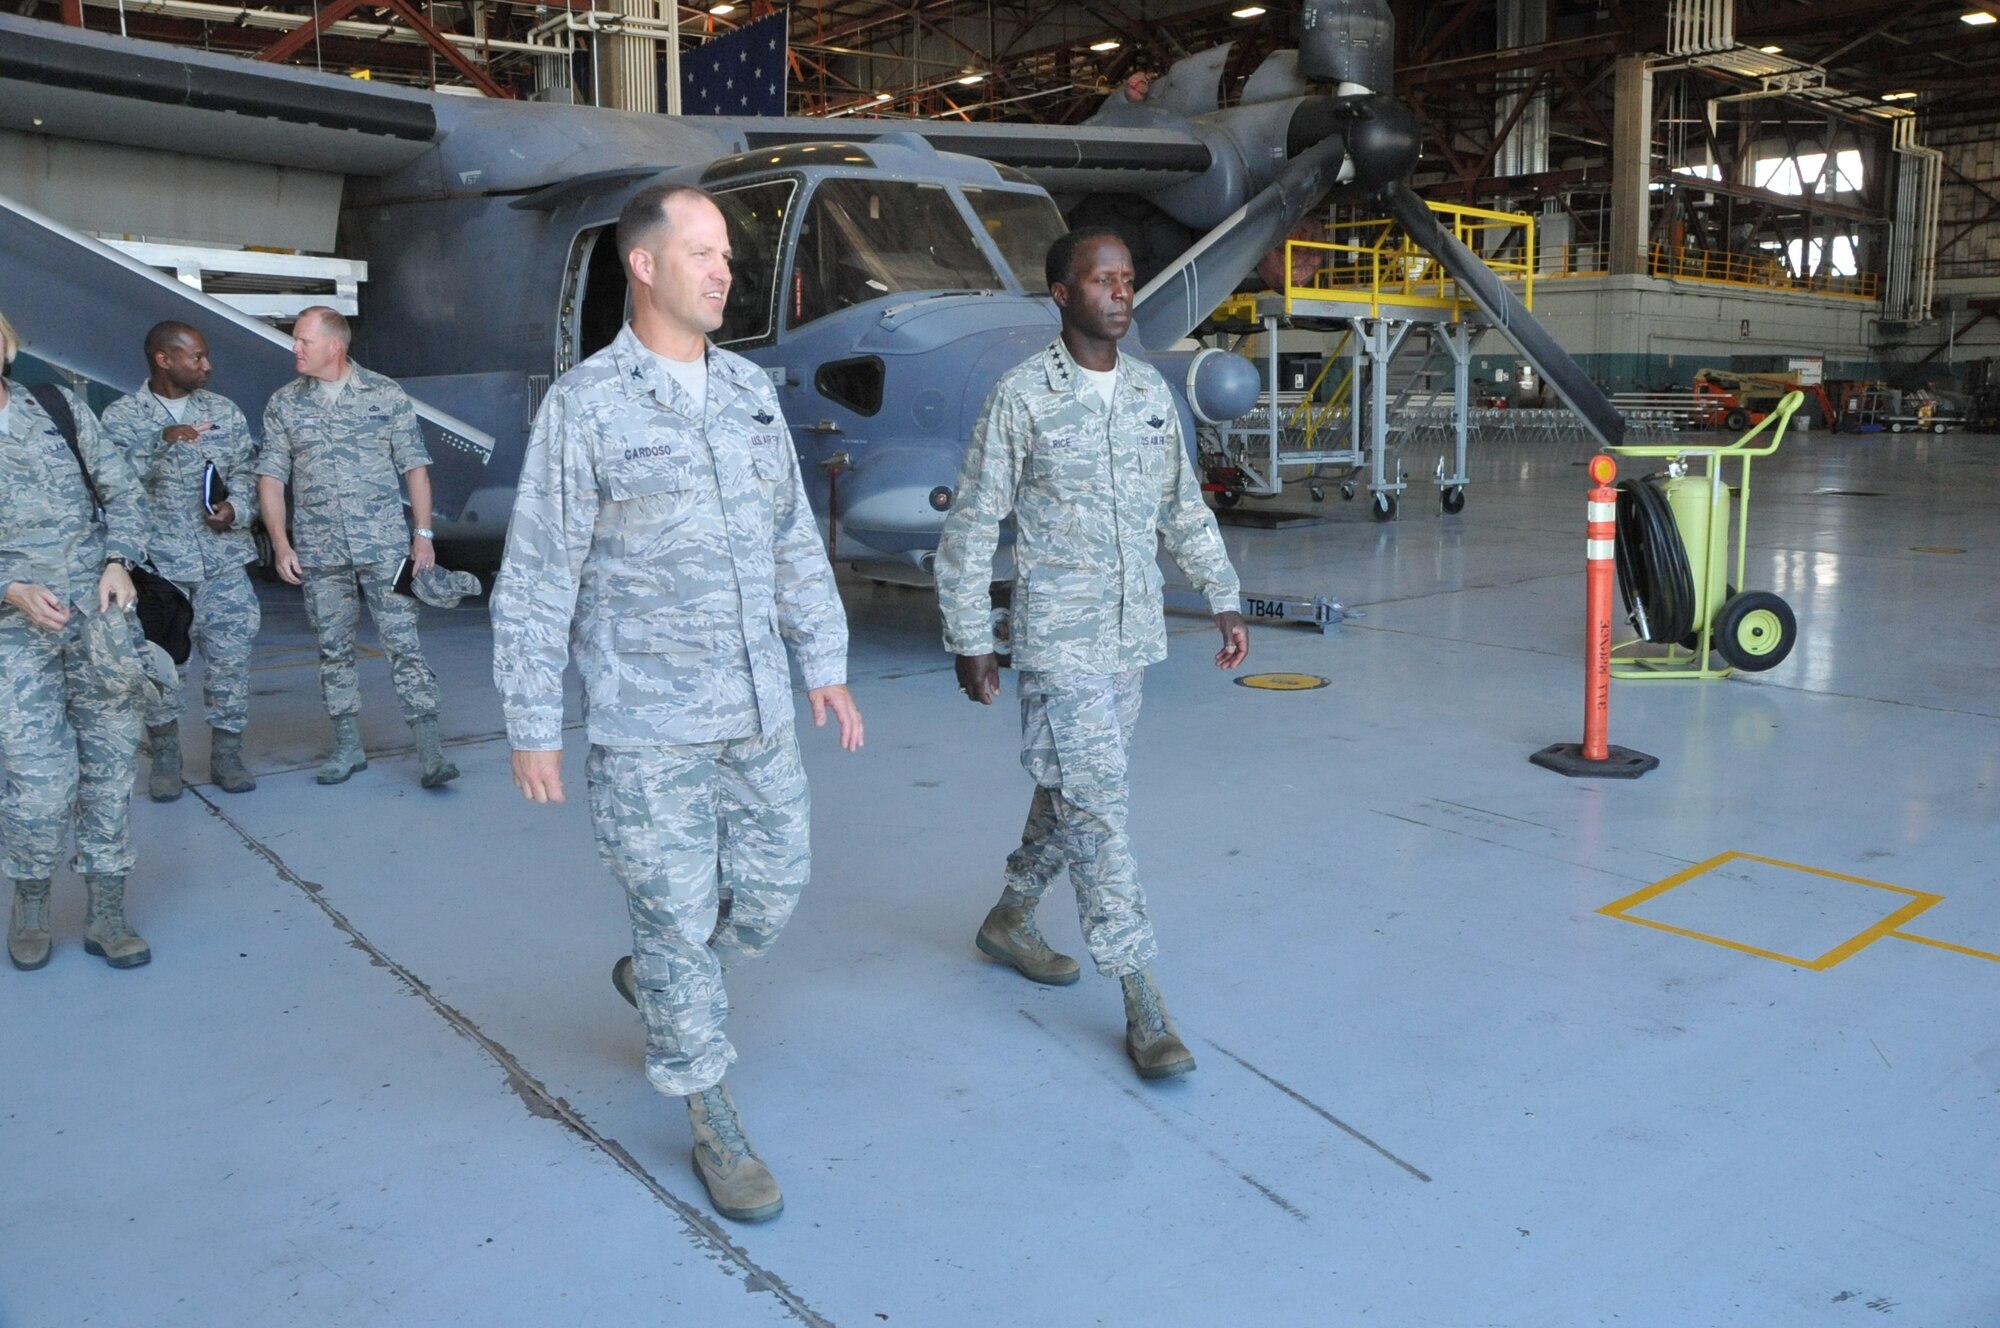 Col. James Cardoso, 58th Special Operations Wing commander, front left, Gen. Edward A. Rice Jr., Air Education and Training Command commander, front right, Chief Master Sgt. James Cody, AETC command chief, back right, and Col. Harold
Wilson, 58th Maintenance Group commander, back left, tour the CV-22 maintenance area at Kirtland AFB.

Photo by Todd Berenger